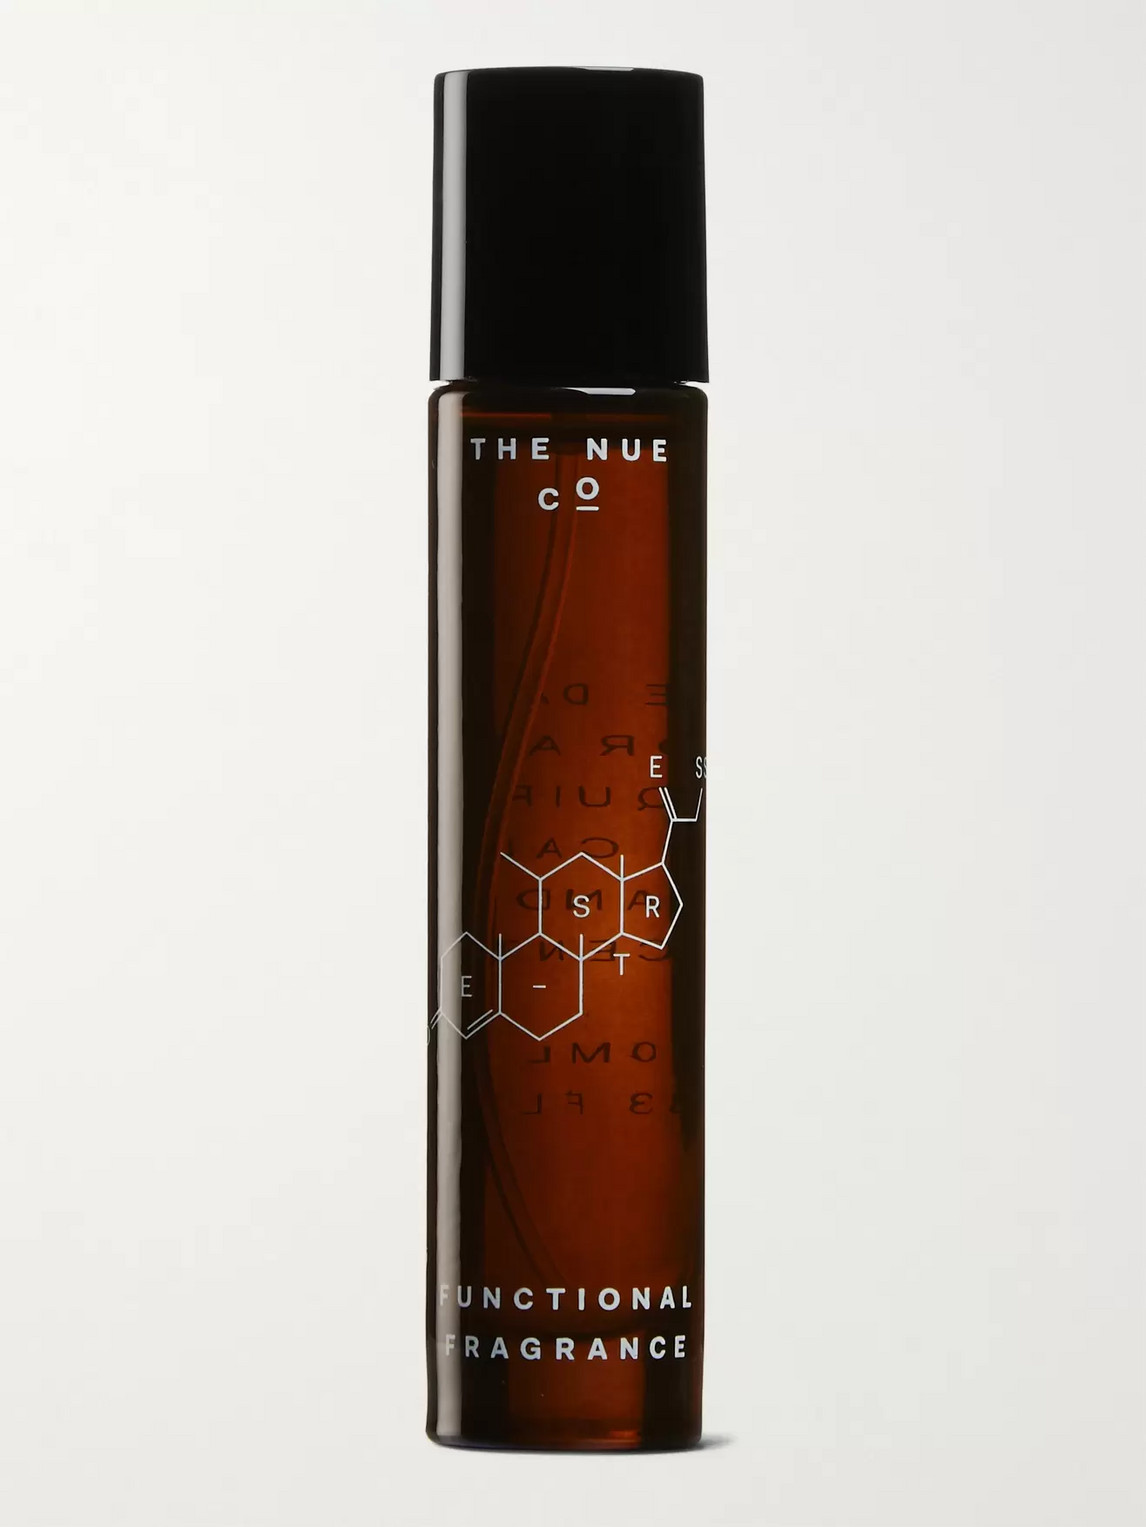 The Nue Co Functional Fragrance, 10ml In Colorless